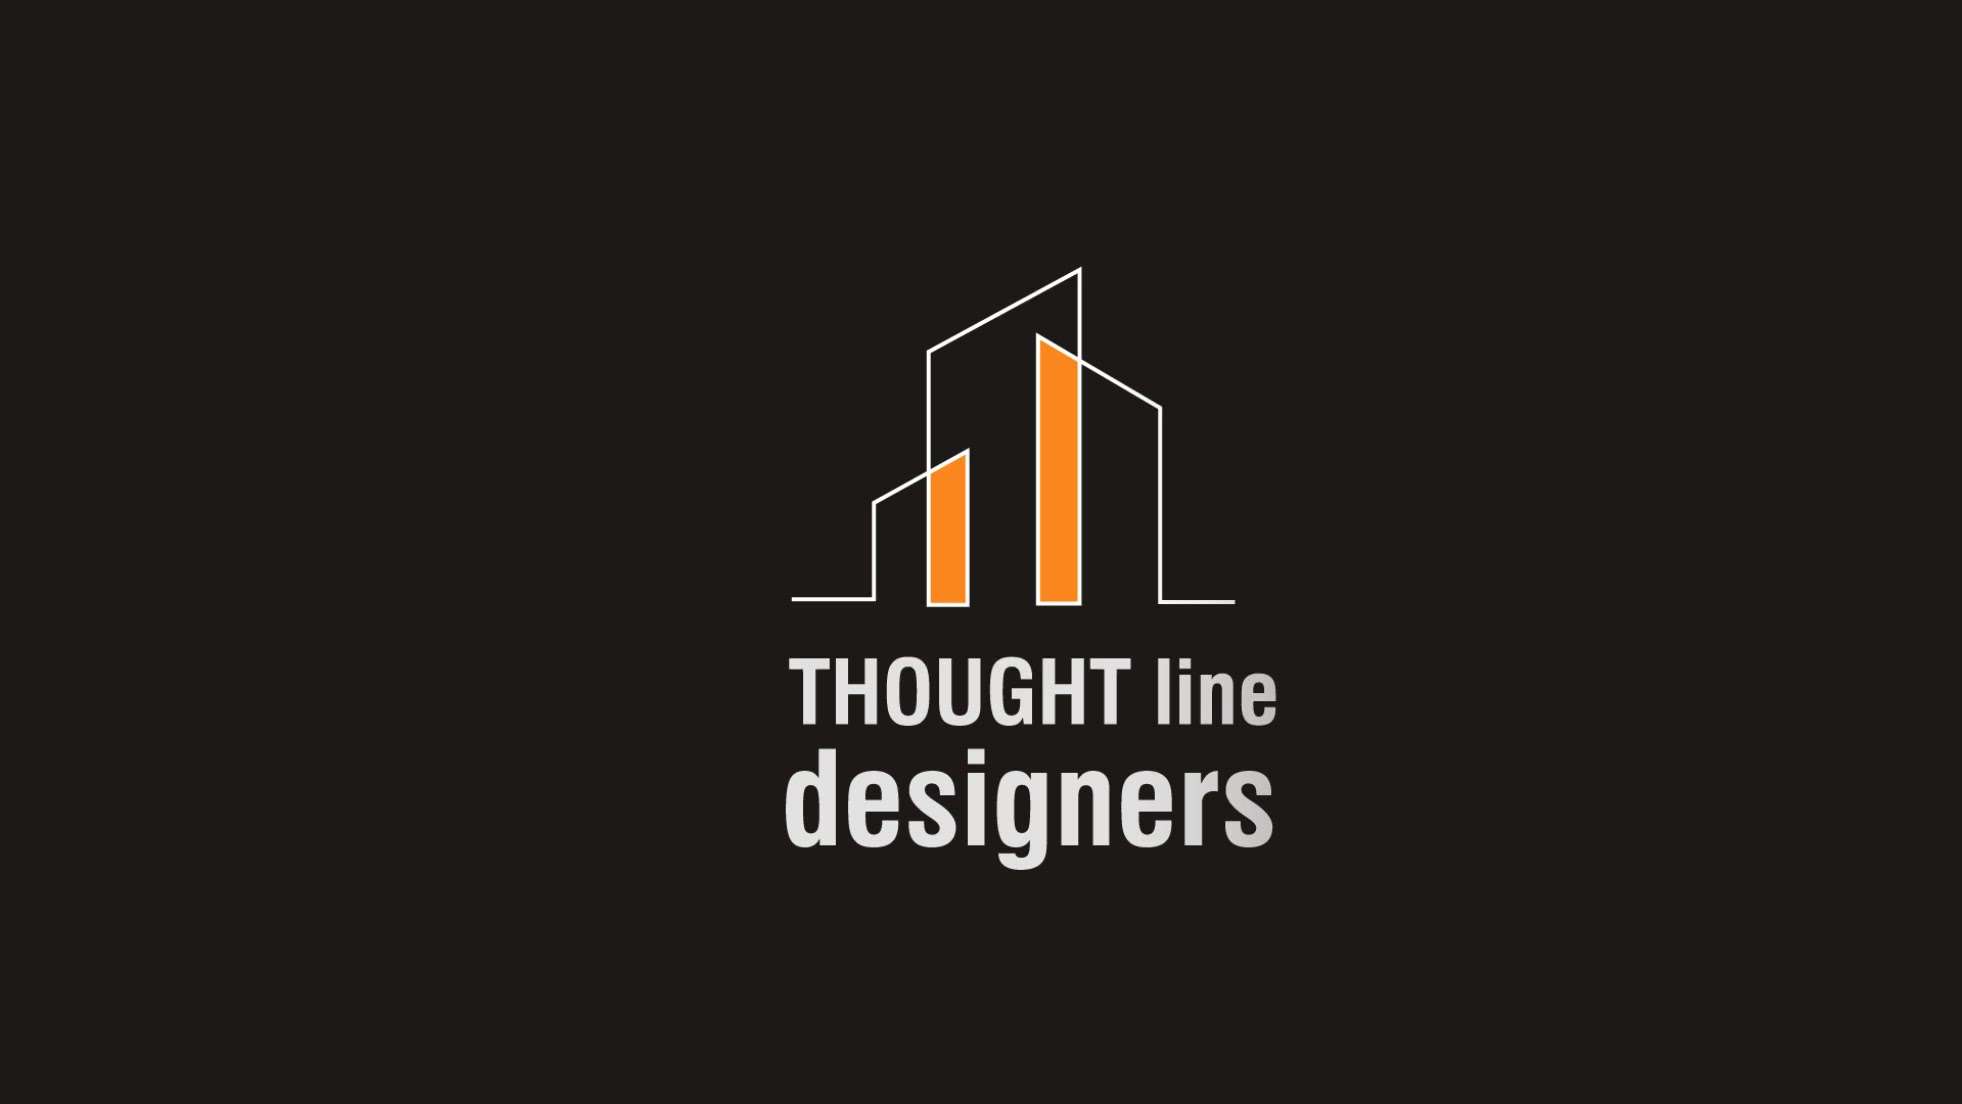 THOUGHTline designers  #thoughtlinedesigners  #profile  #architecture   #interiordesign   #constructioncompany  #Contractor  #consultant